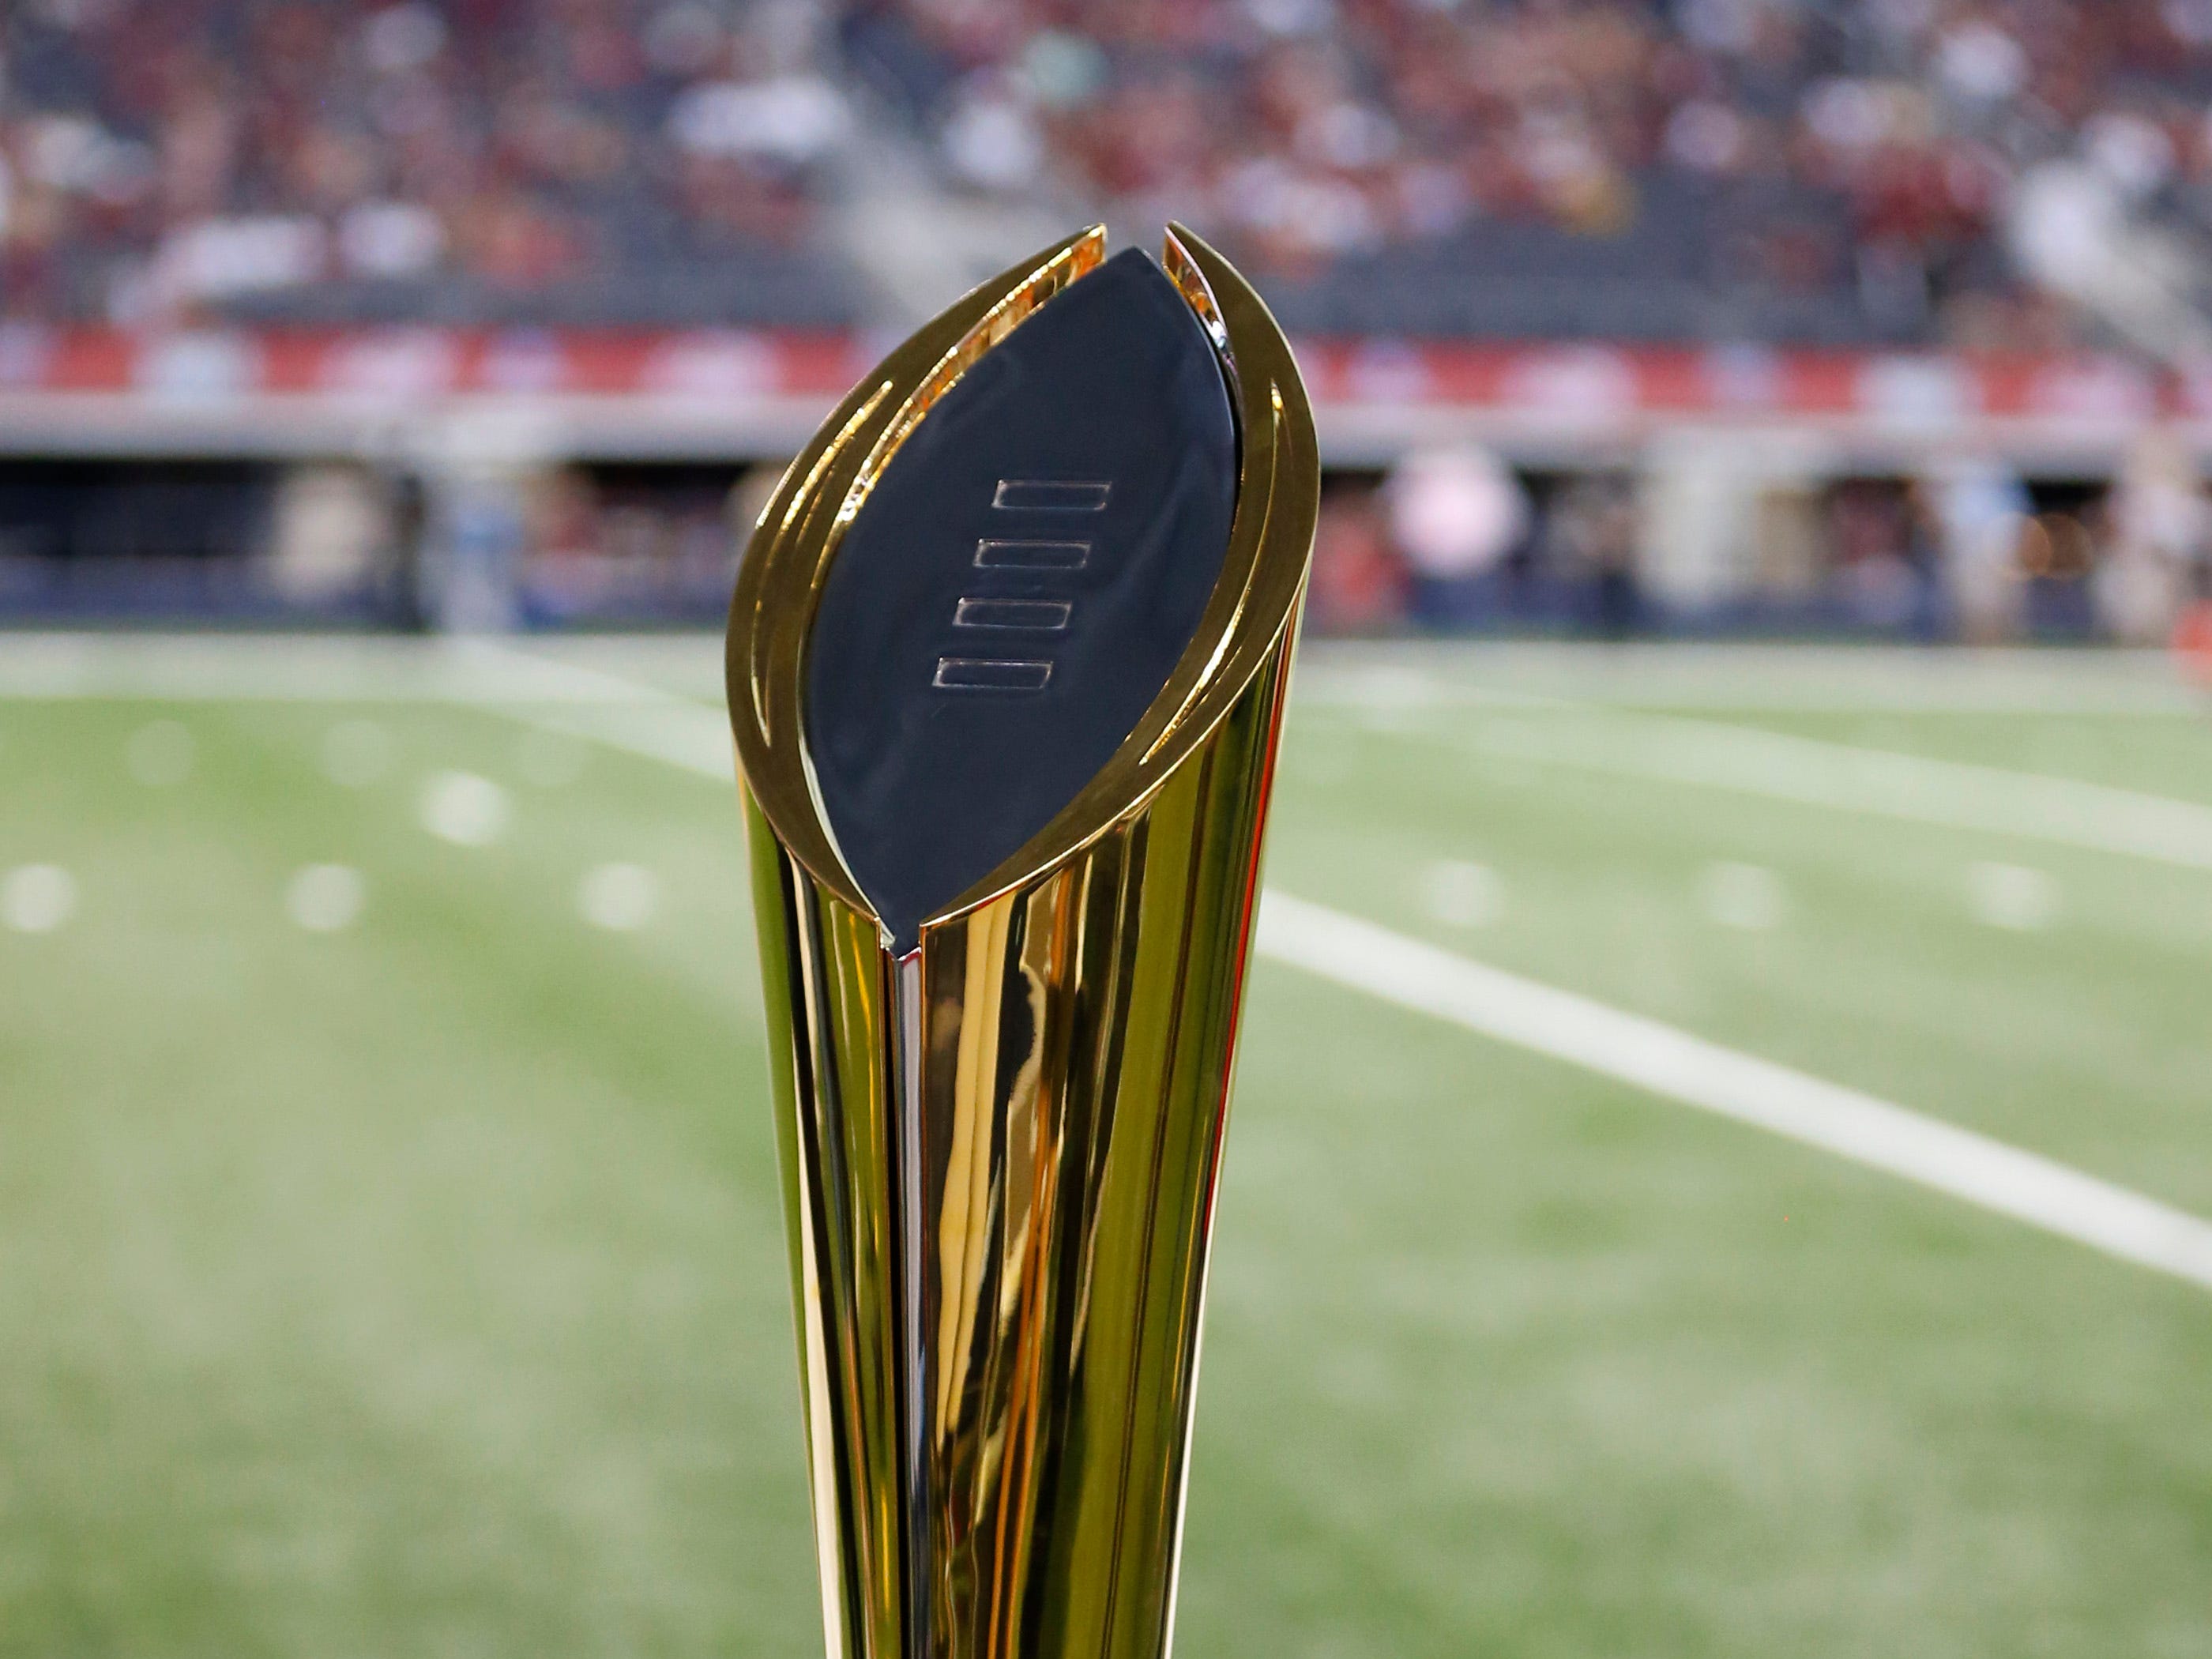 Nonconference games could decide College Playoff spots | USA TODAY Sports